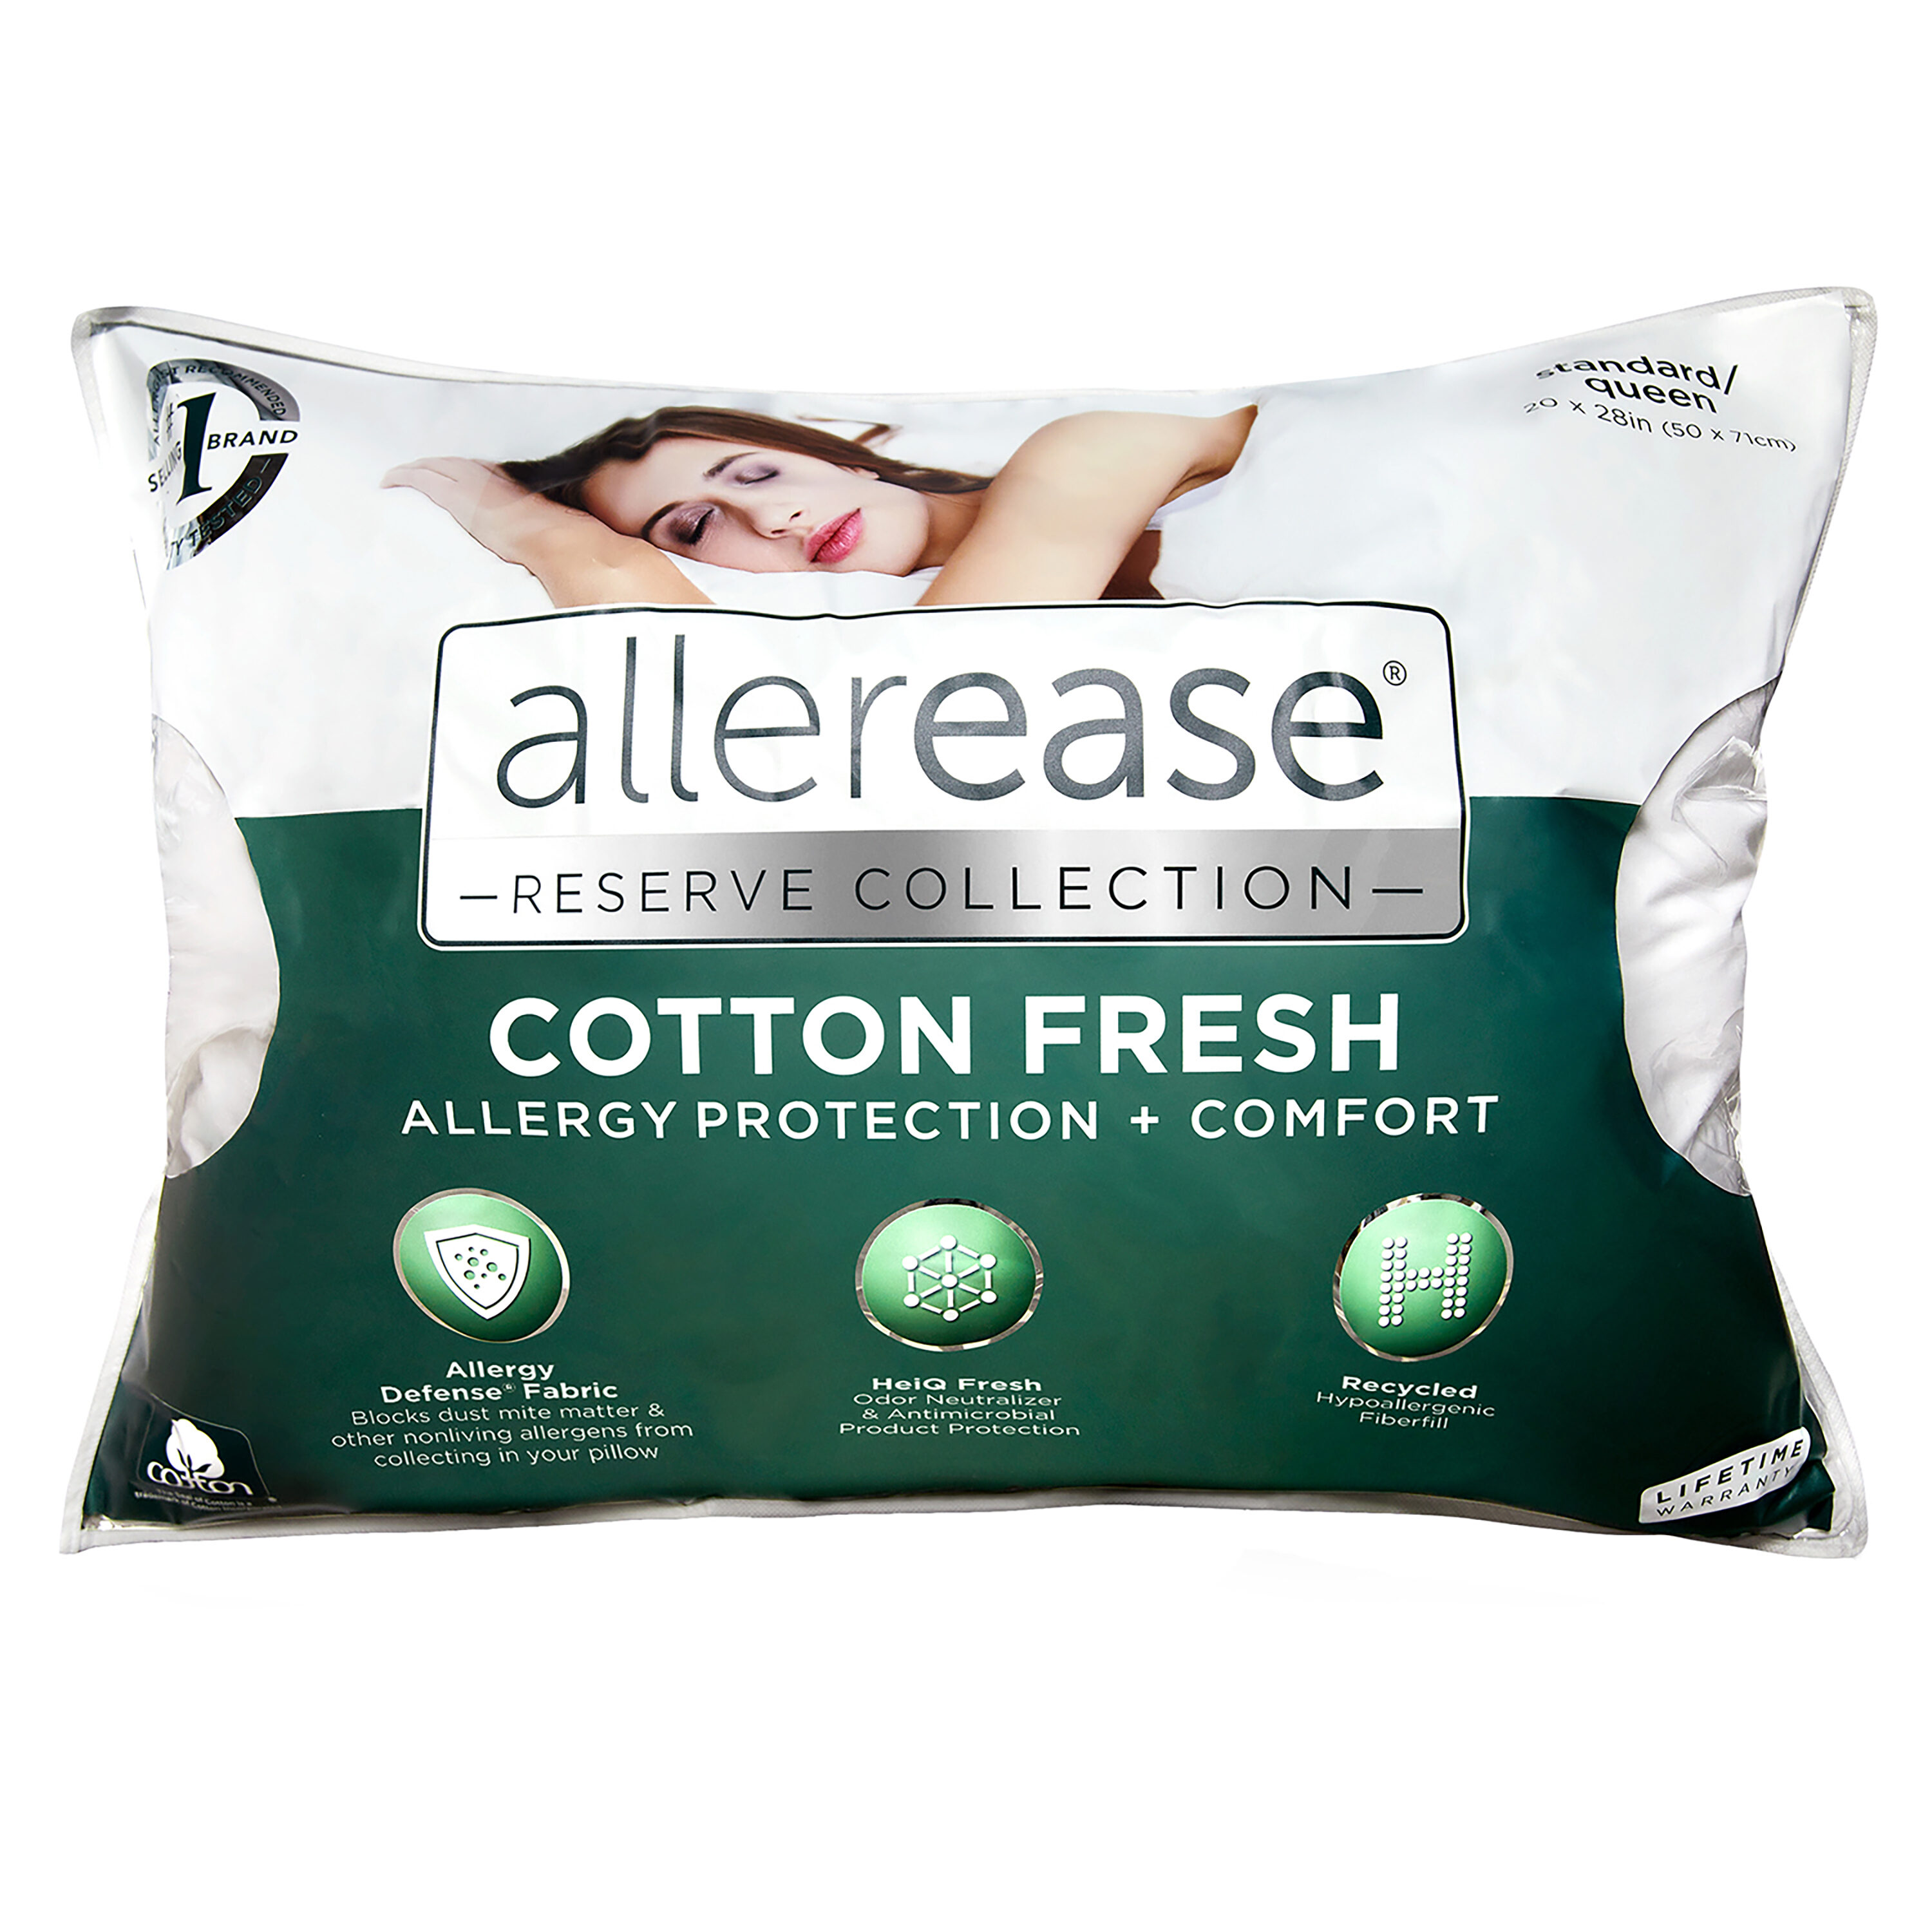 Pillows 4-Pack bed pillow with Built-In Ultra-Fresh Anti-Odor